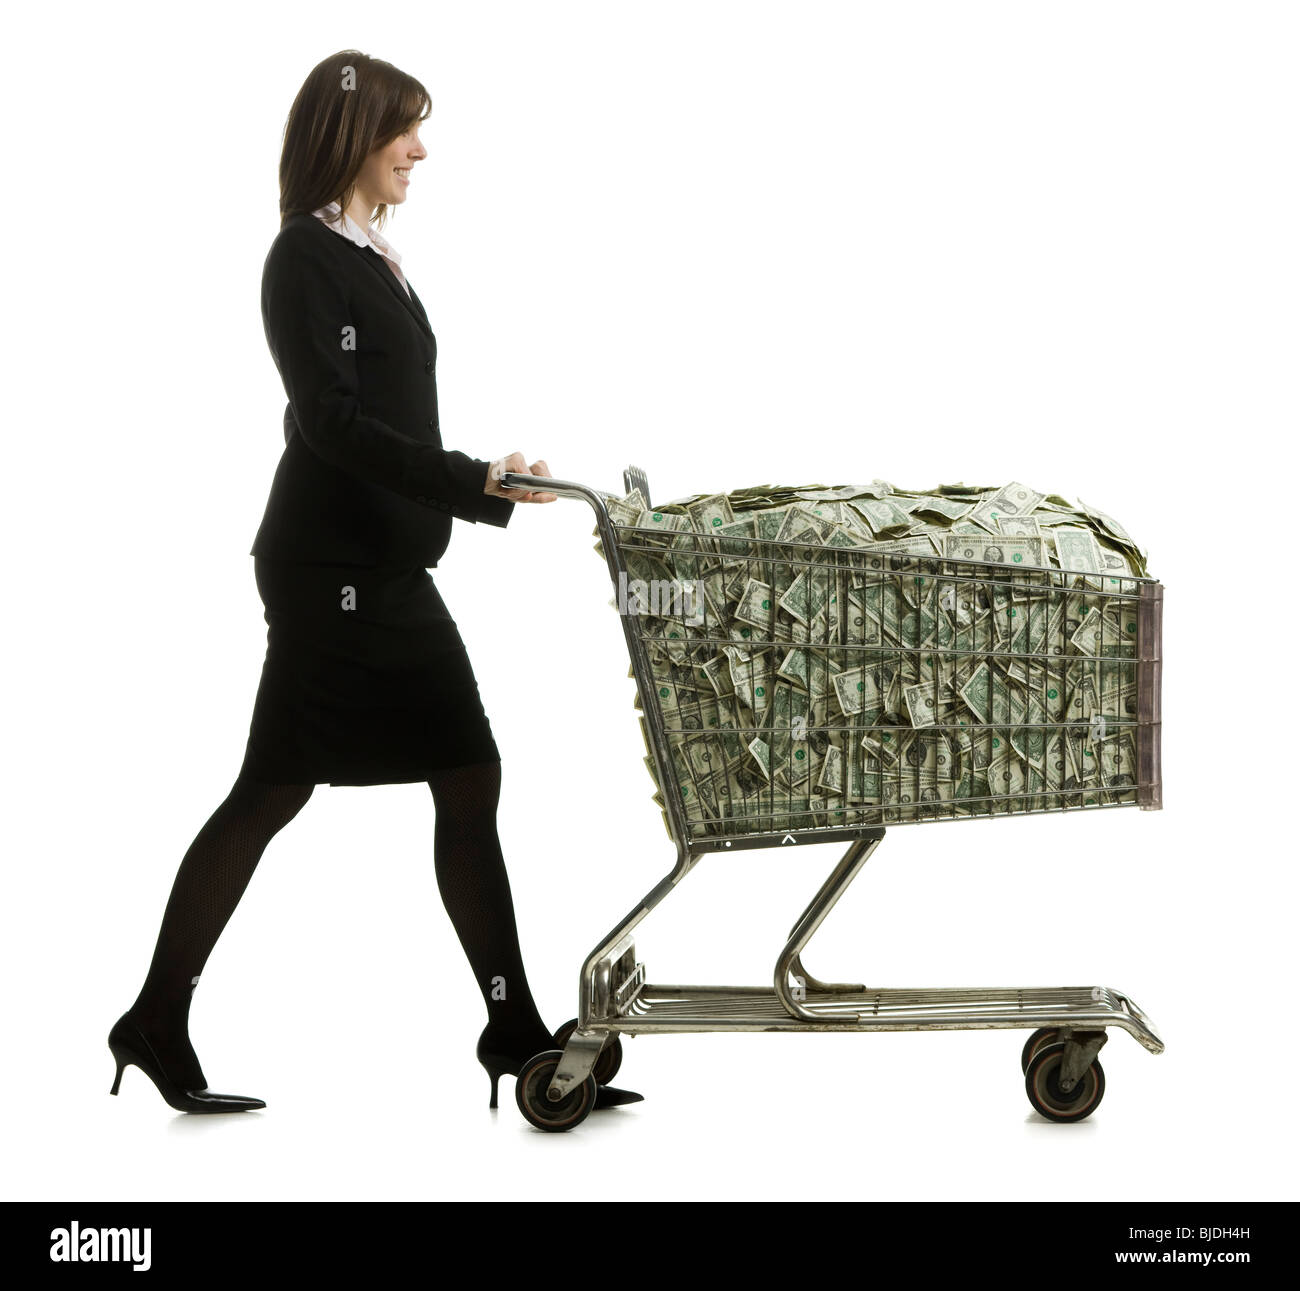 businessperson with a shopping cart full of money Stock Photo